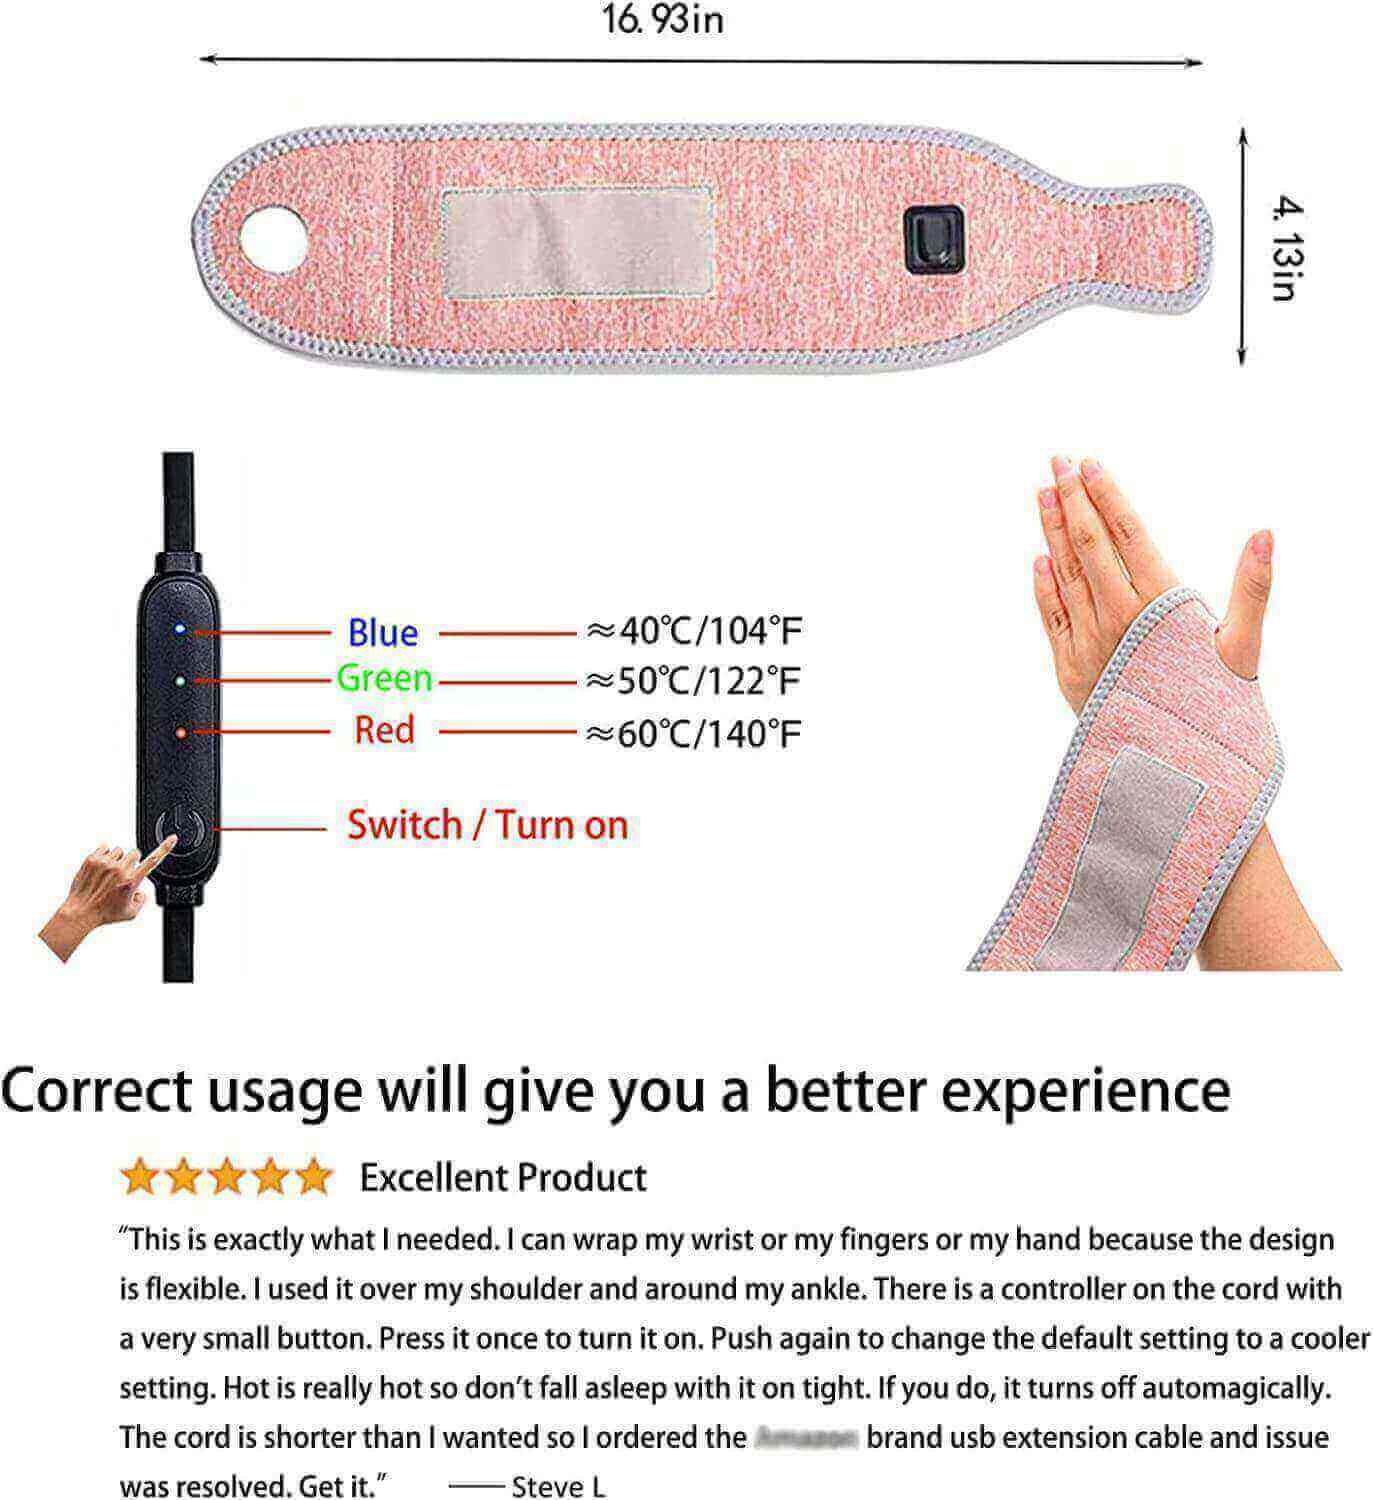 Fanwer Electric Heating Pad for Wrist & Hand, temperature changing with colors